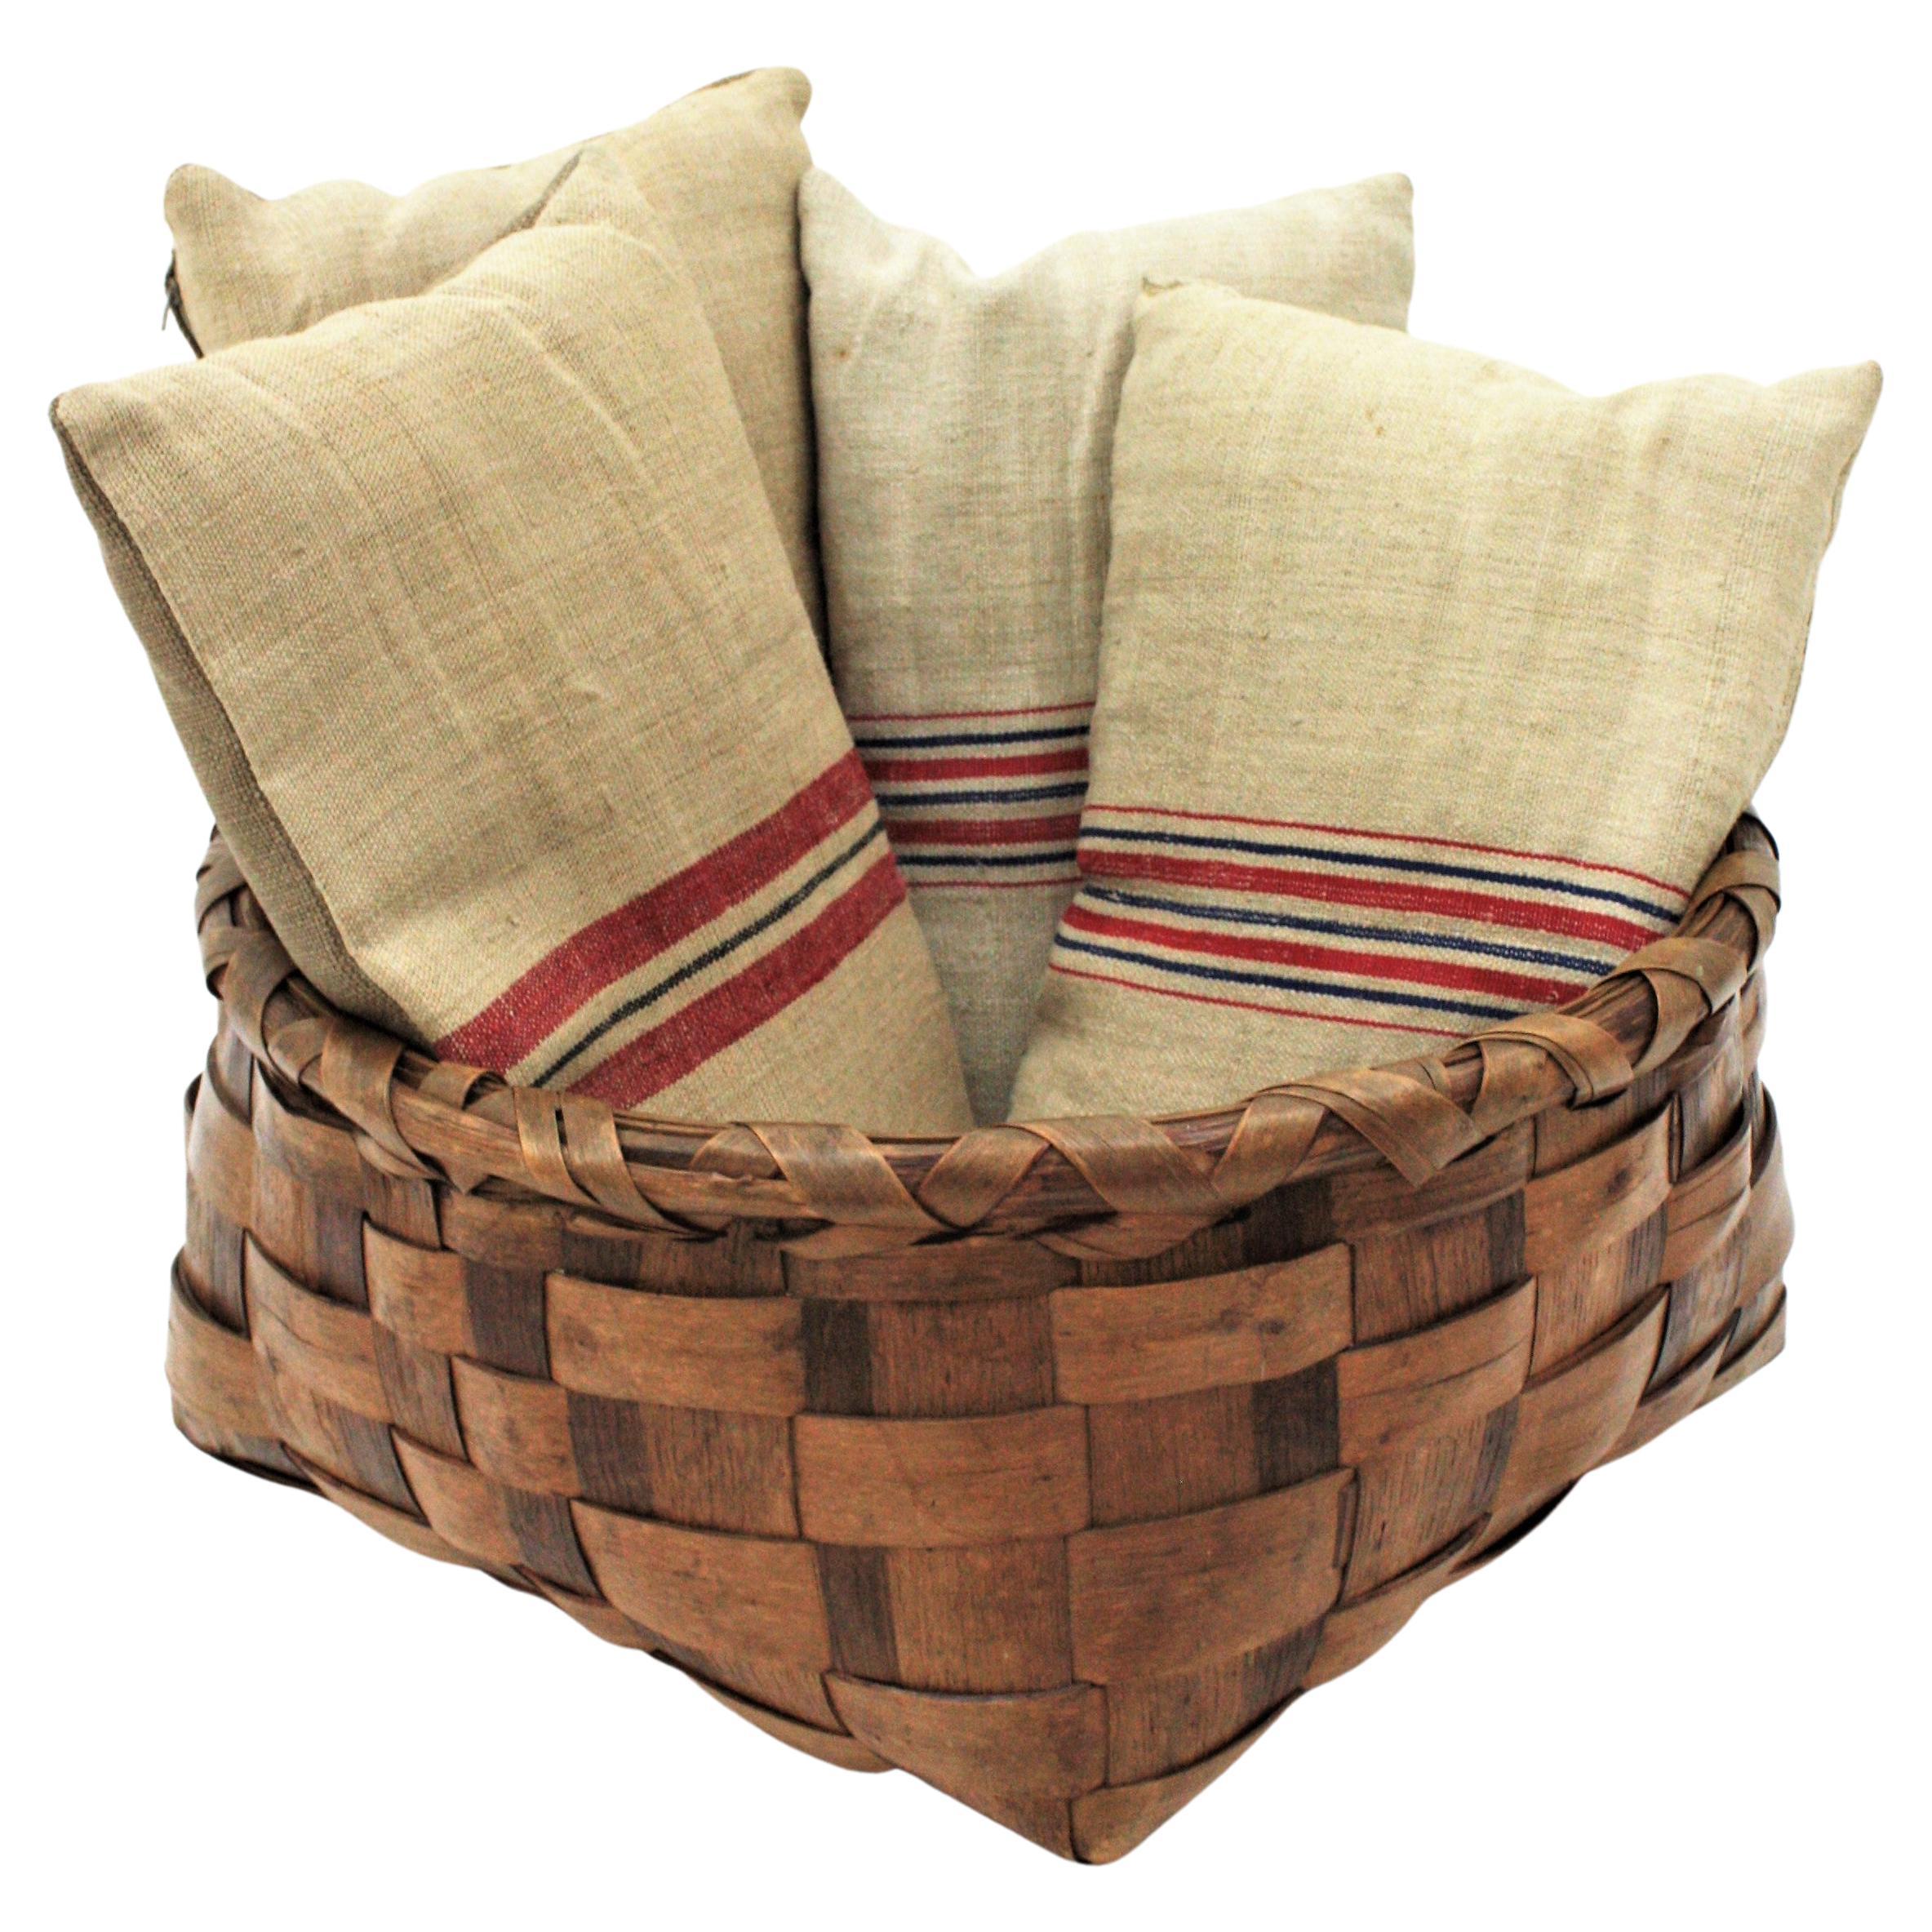 Traditional hand-braided wood decorative basket / storage basket, Spain, 1940s-1950s.
Hand-crafted basket from Galicia, at the northern part of Spain.
Wooden stripes beautifully woven creating a rectangular large basket. It can be used as storage